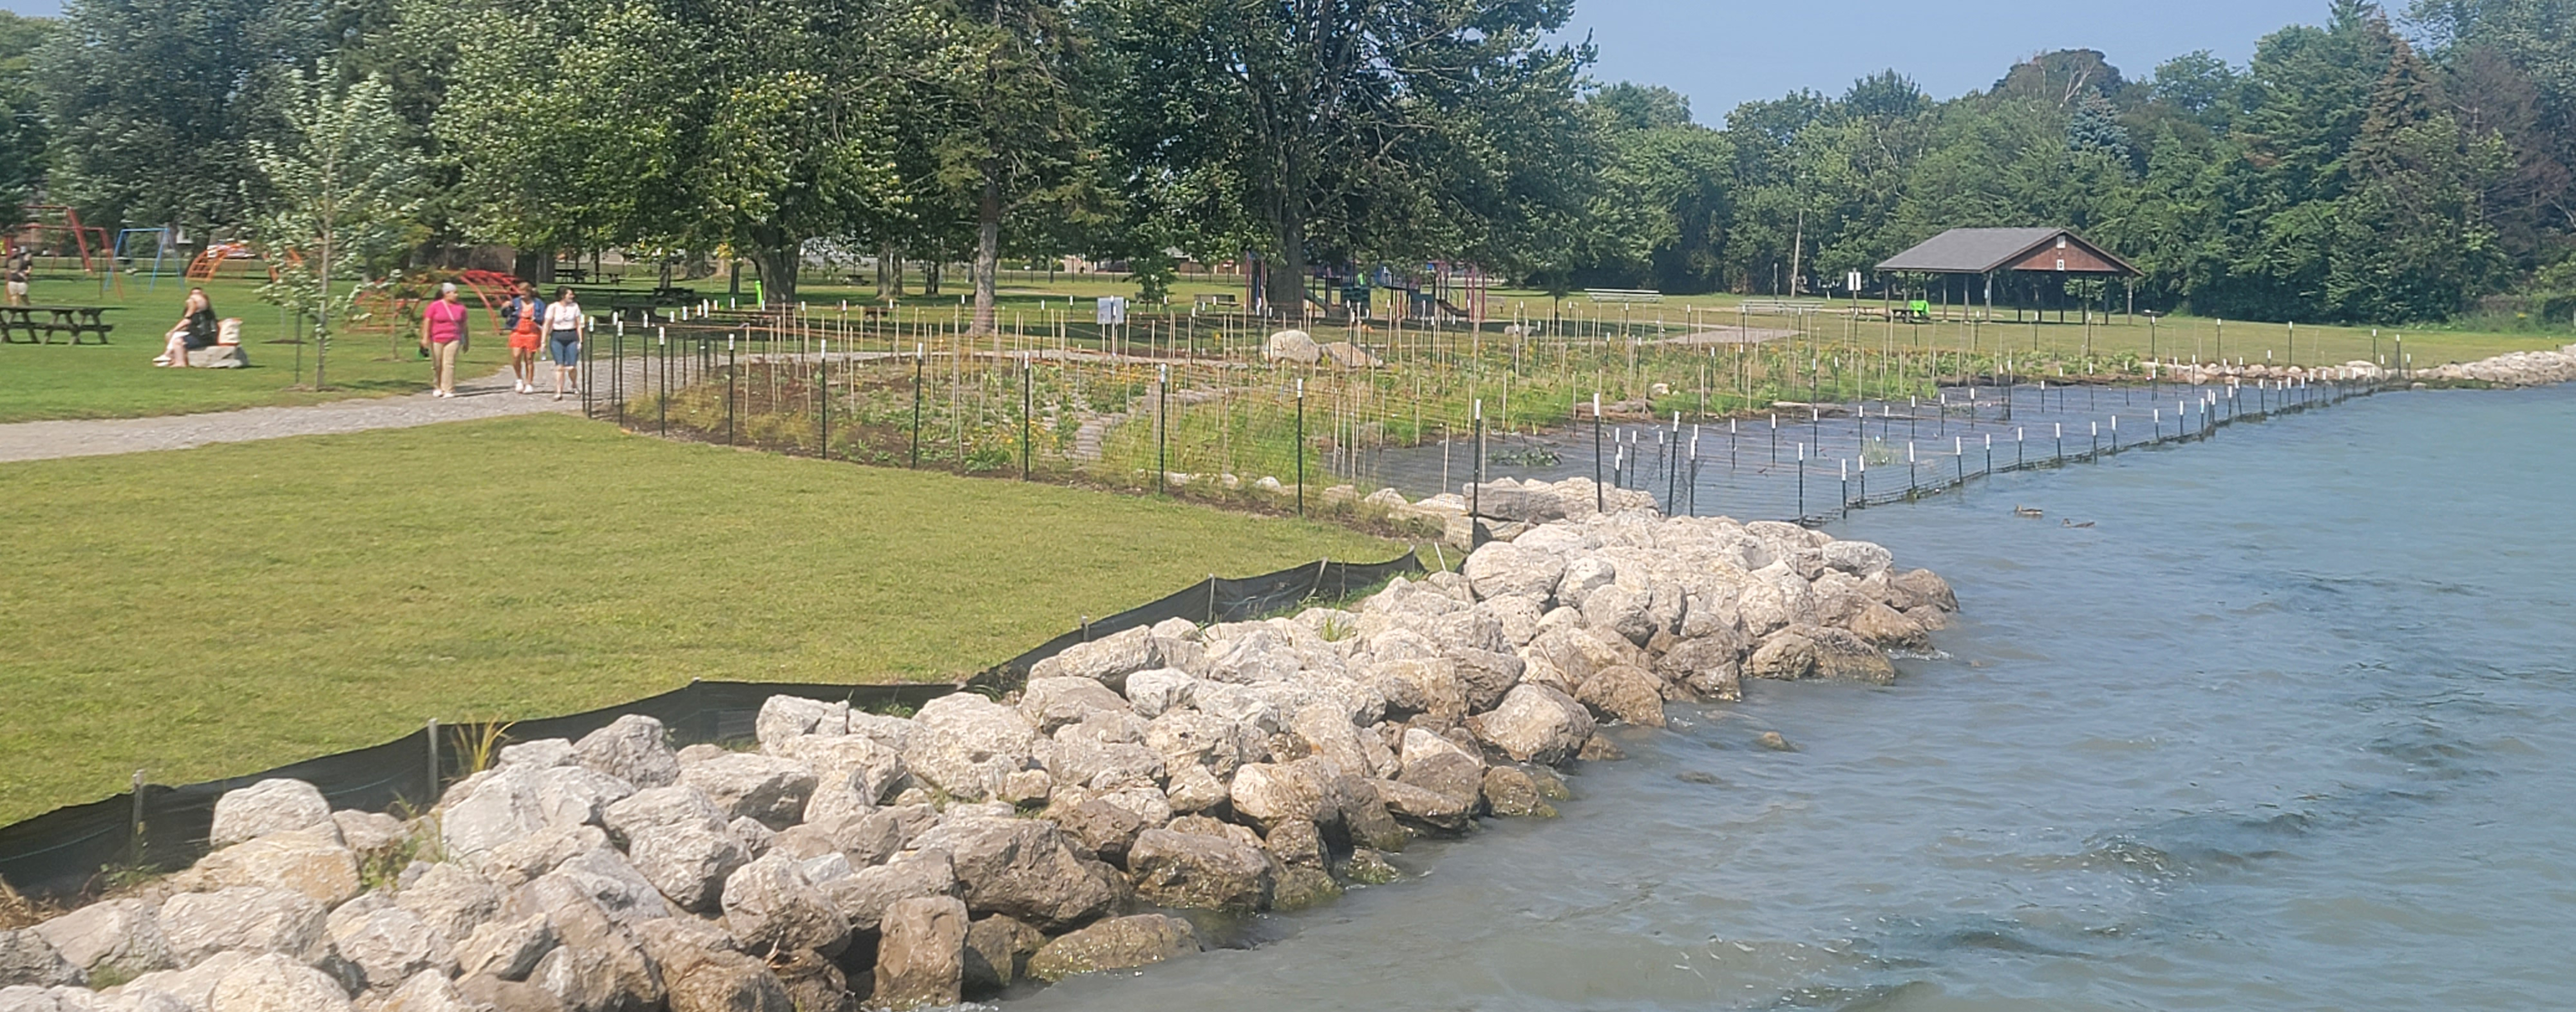 The newly restored shoreline features habitat structures that improve the biodiversity of the ecosystem.